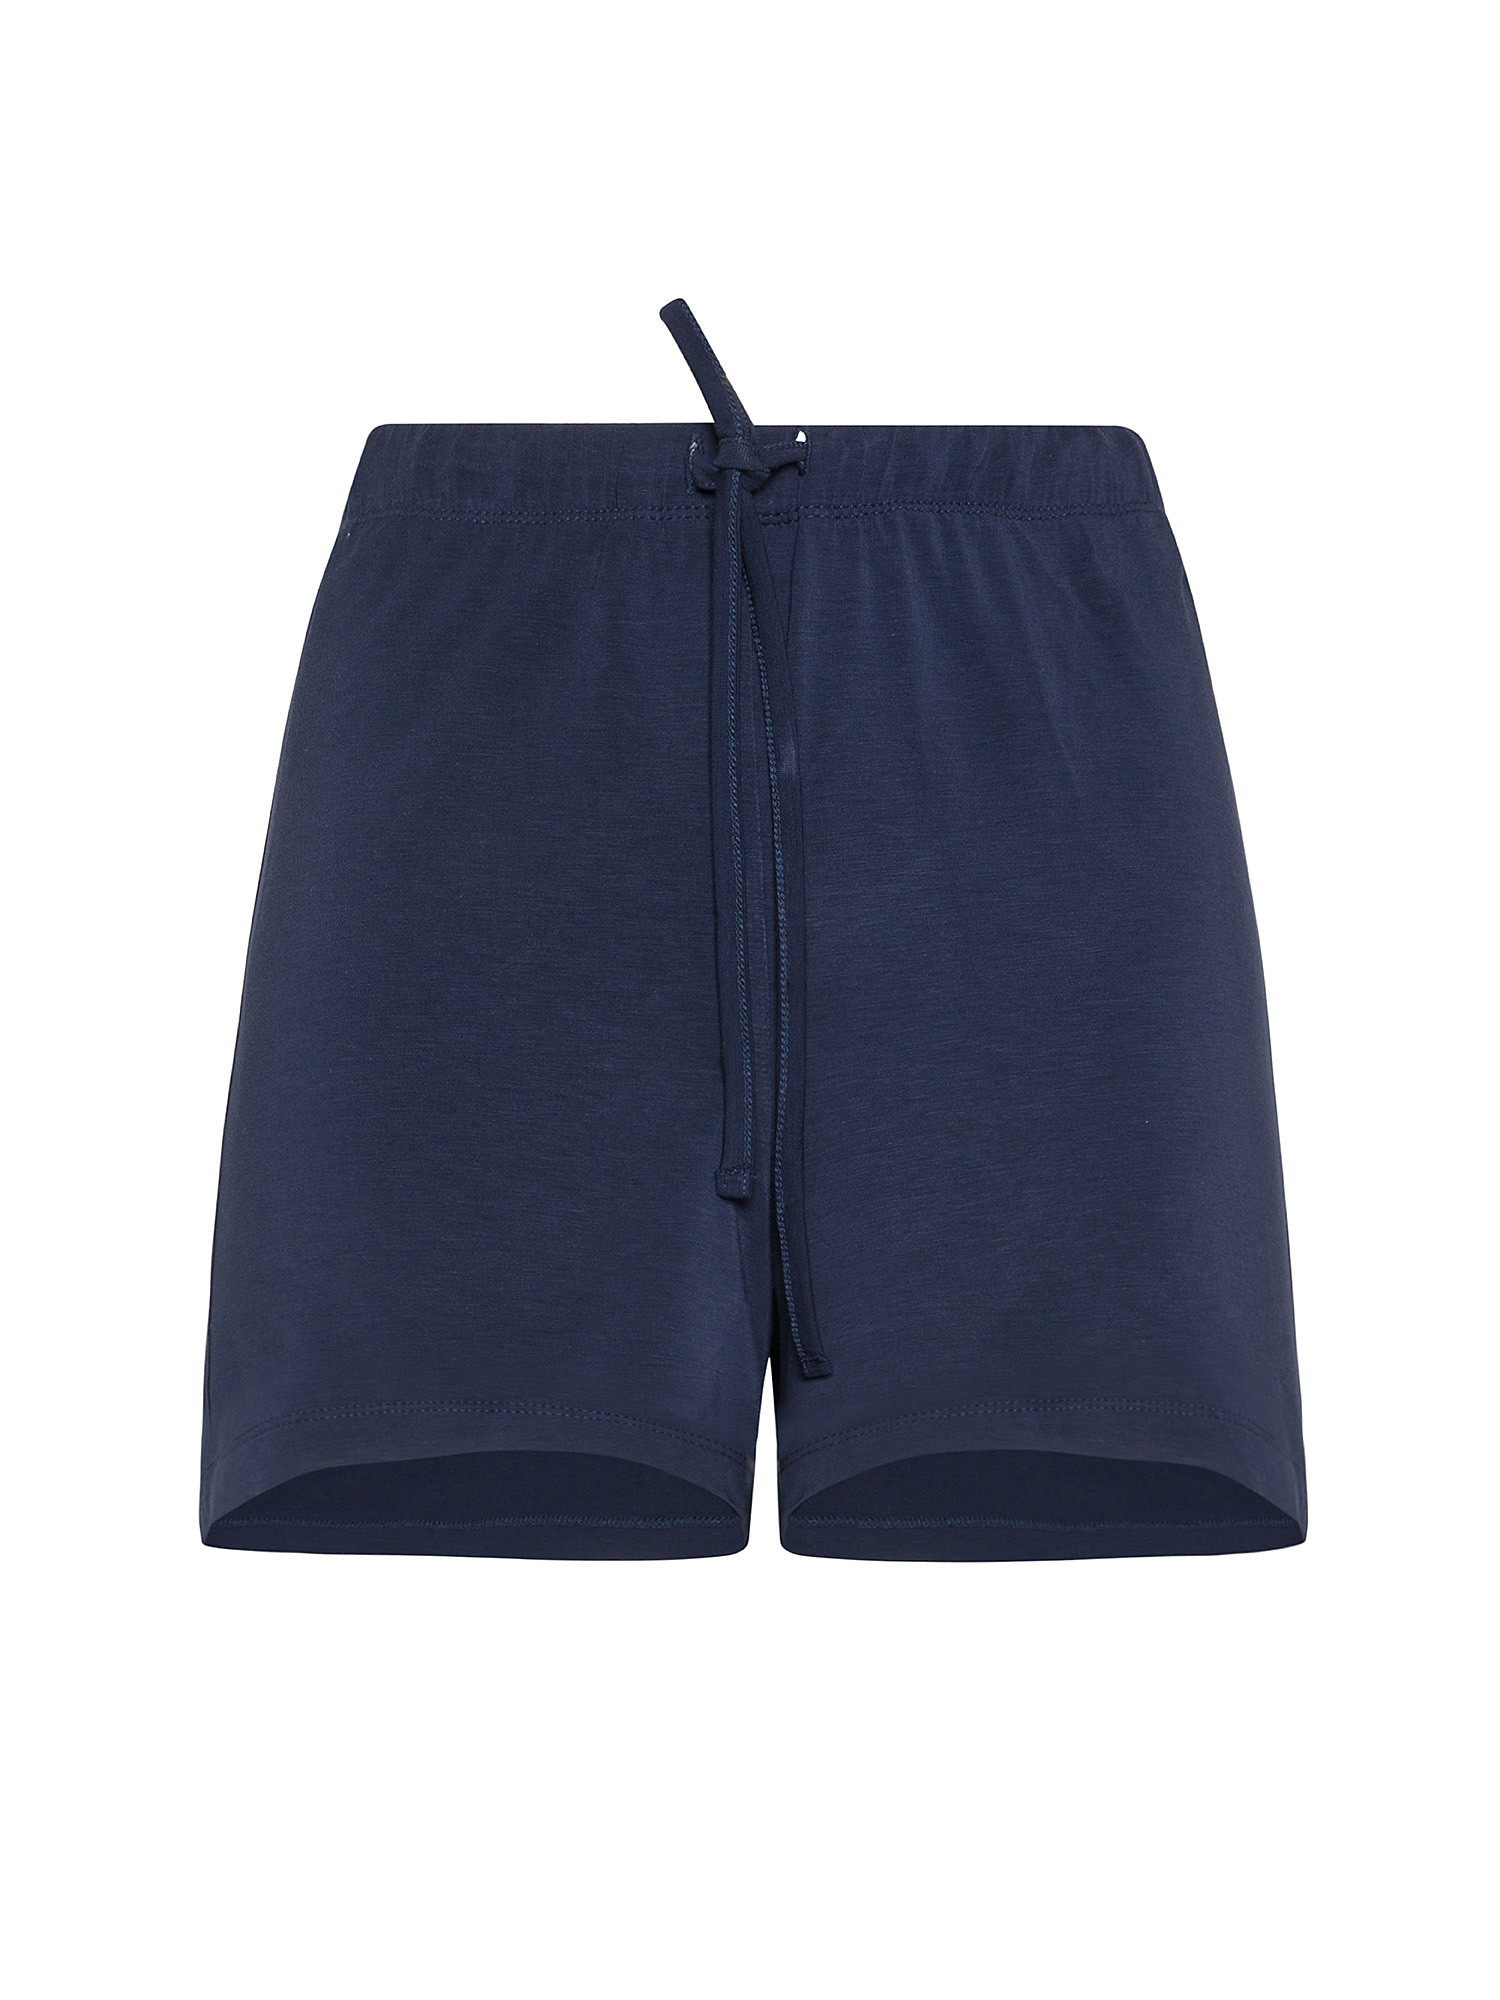 Solid color bamboo viscose shorts, Blue, large image number 0